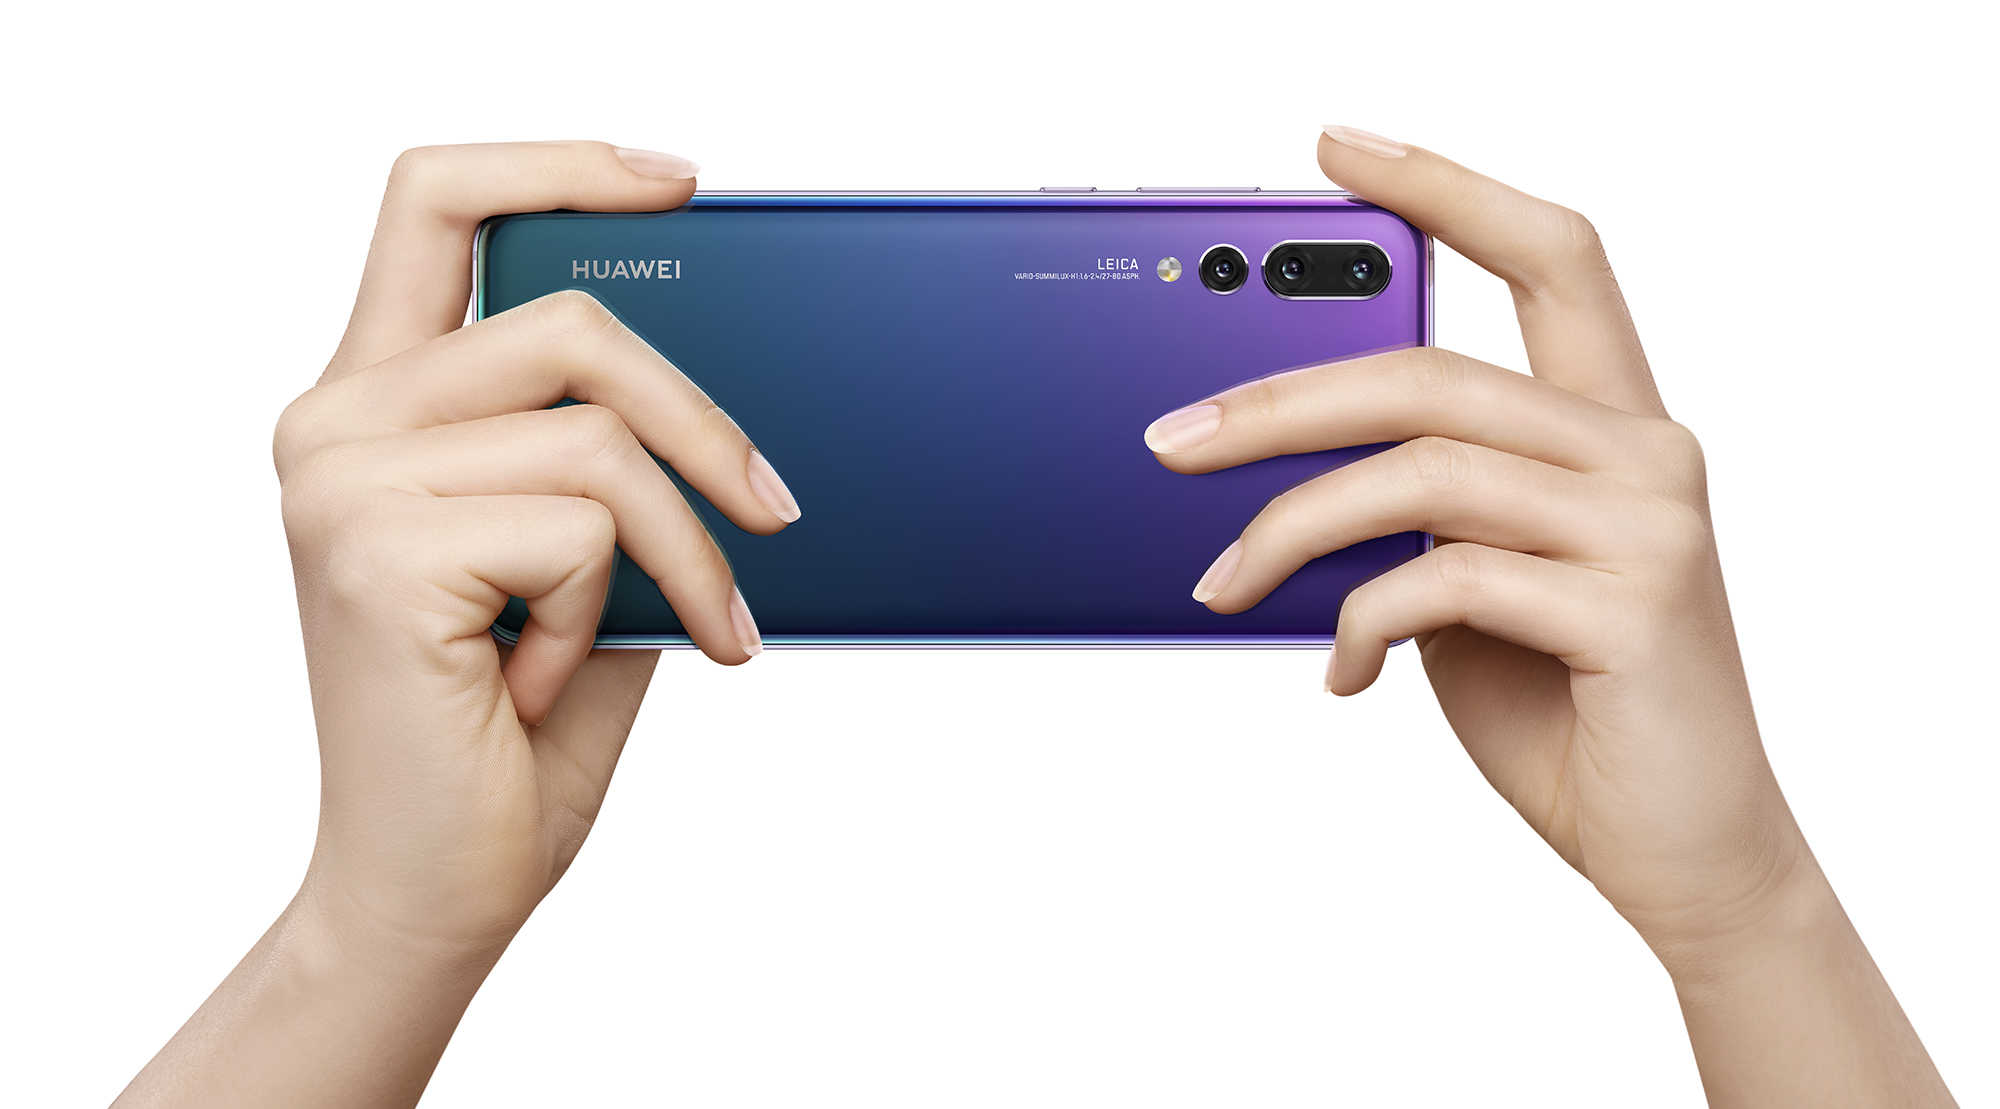 The 2018 Huawei P20 Pro flagship has received a major EMUI 10.0.0.193 update with new features globally